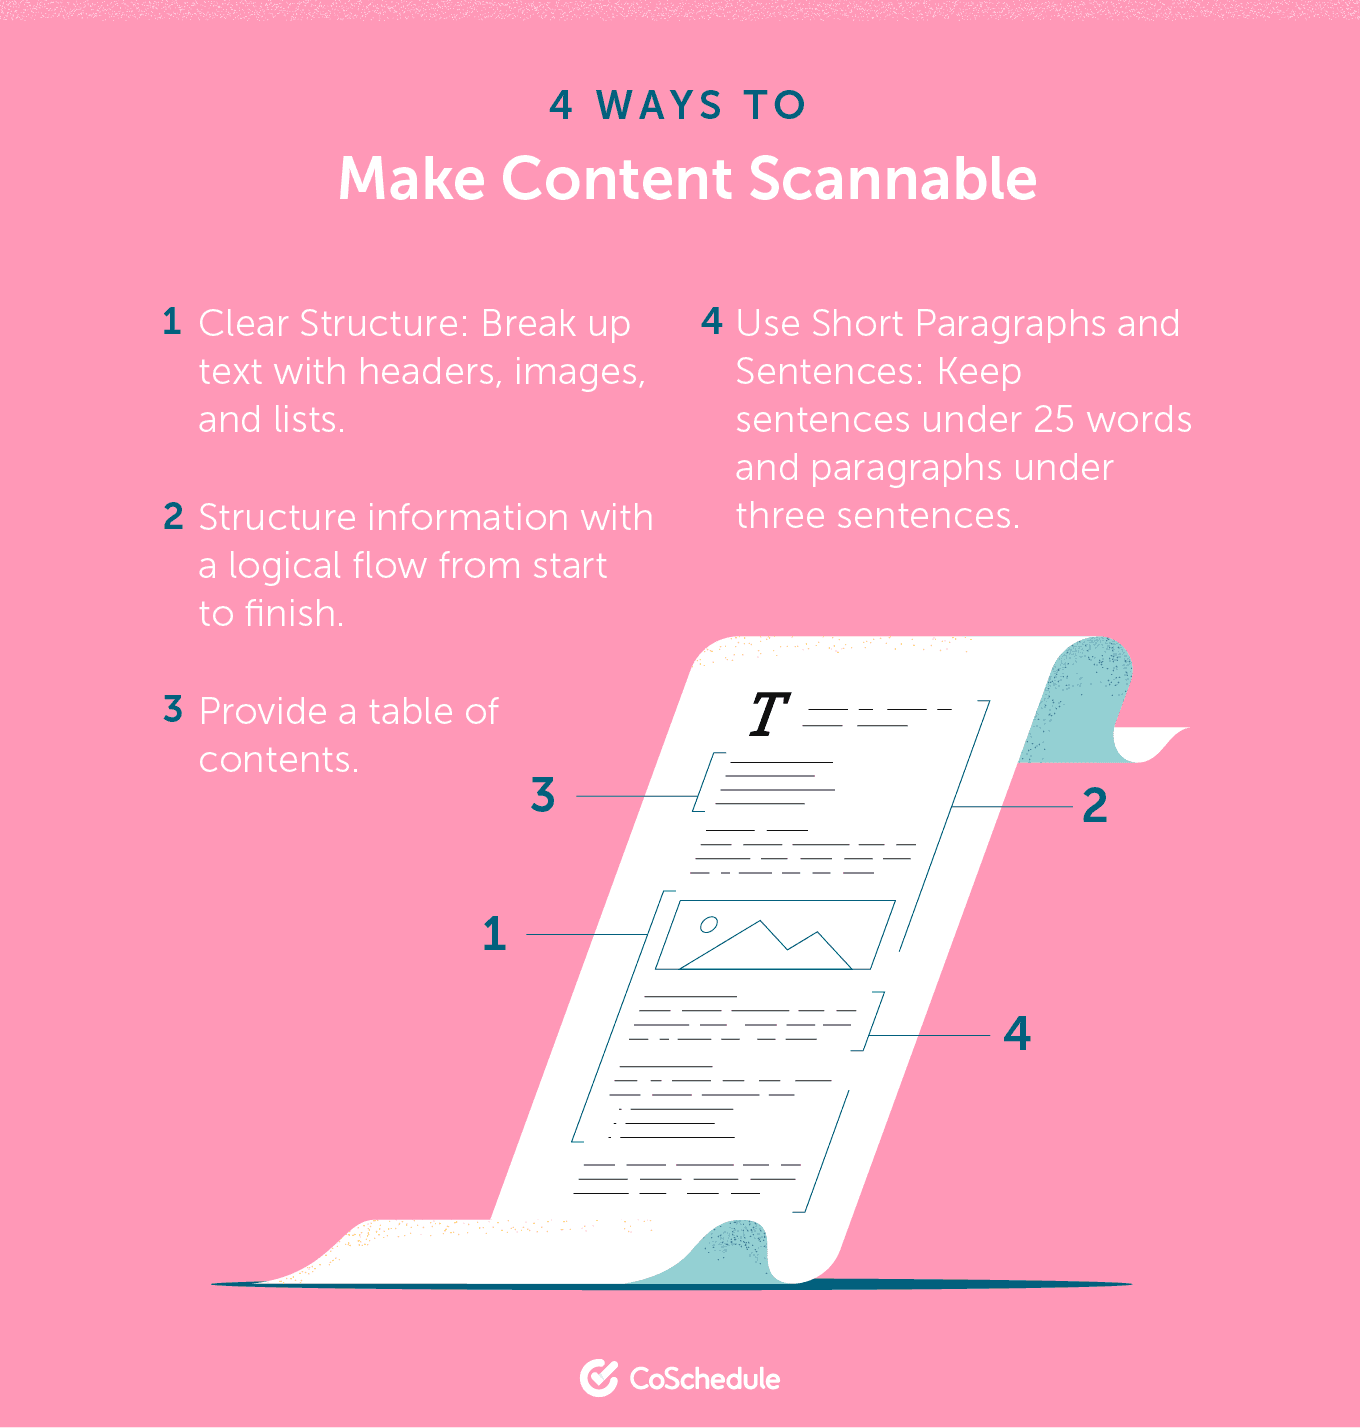 4 Ways to Make Content Scannable